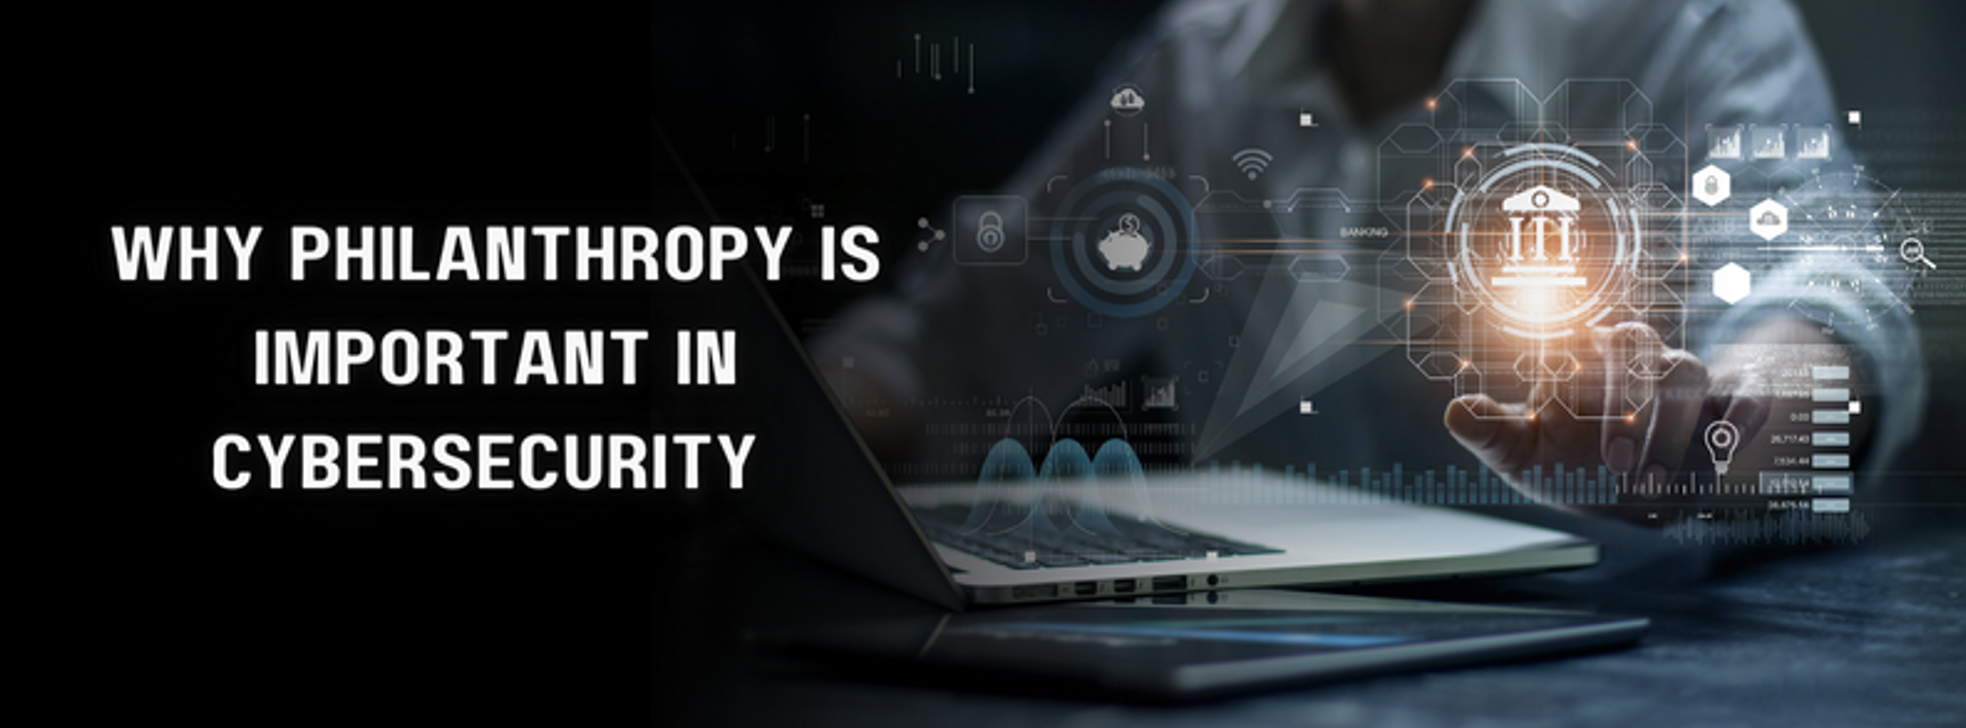 Why Philanthropy is Important in Cybersecurity